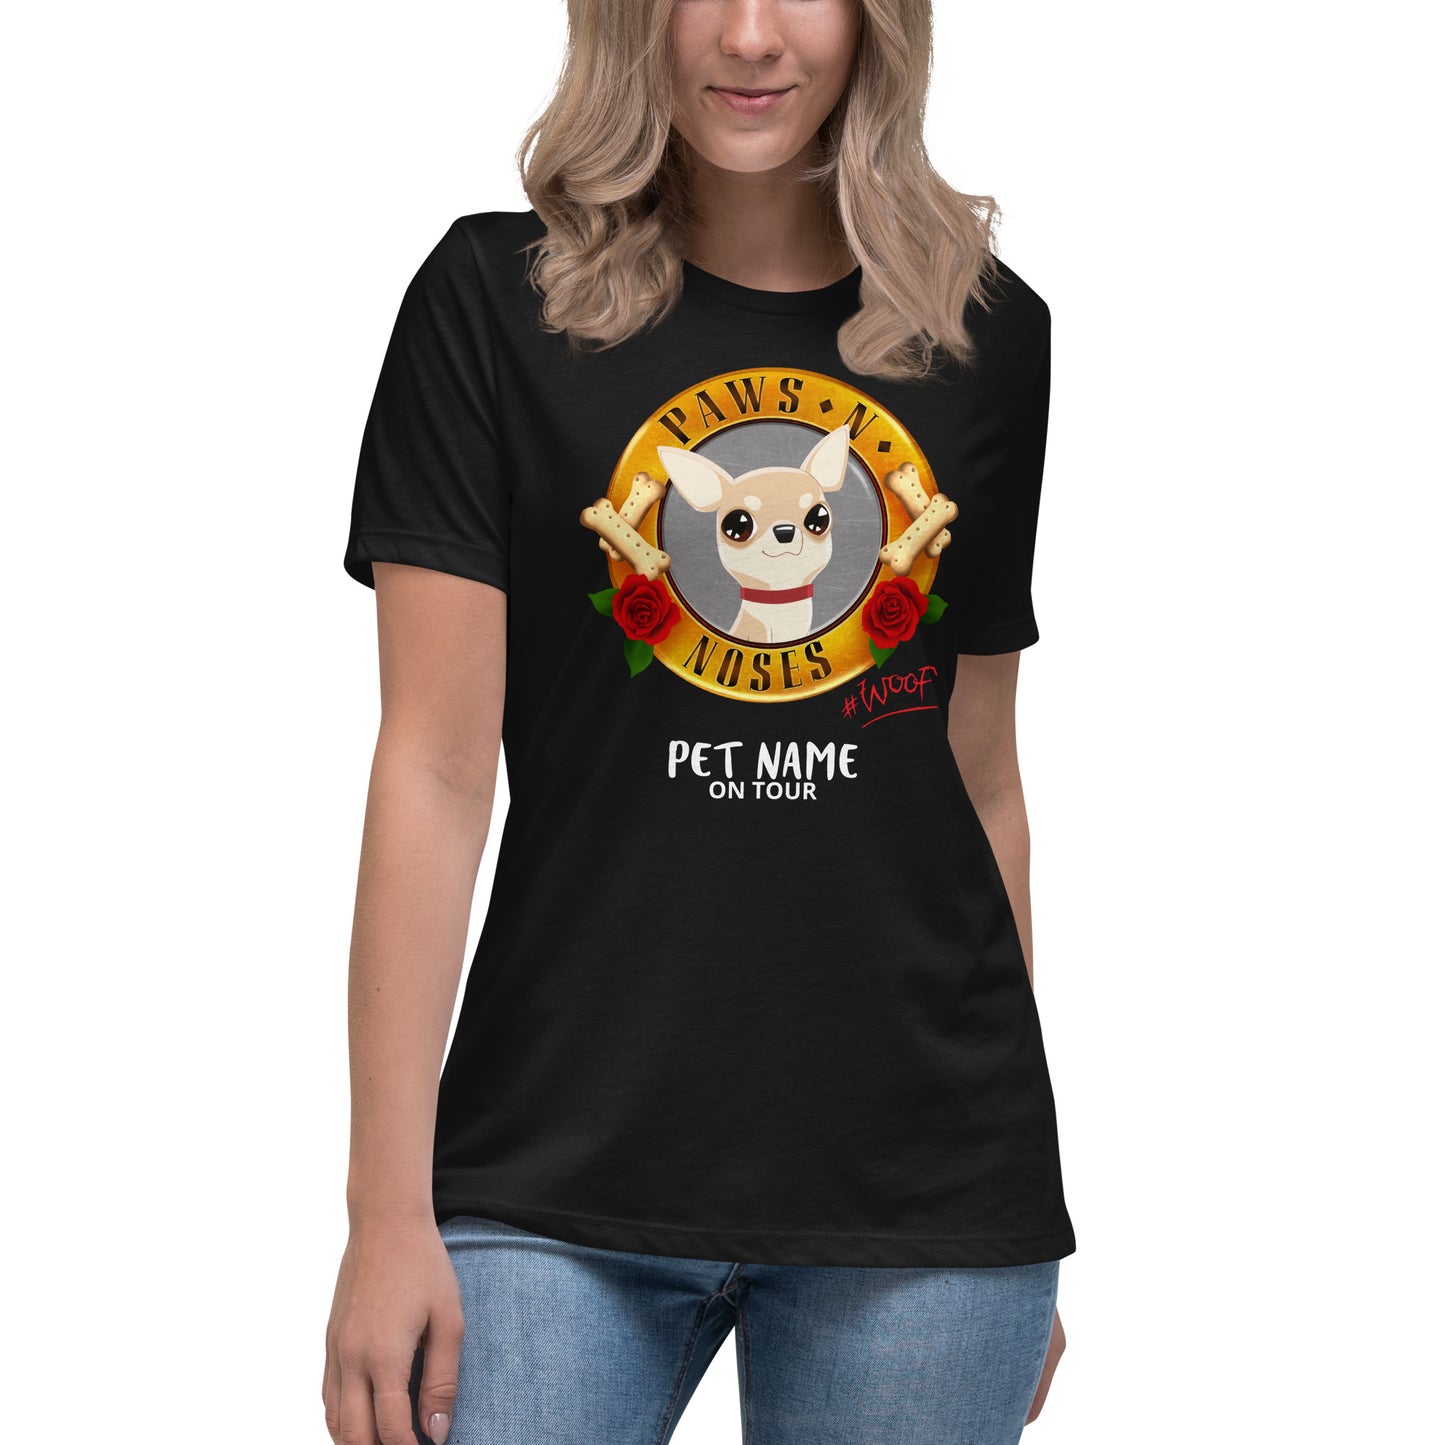 Chihuahua (Brown/White) -  Women's Paws 'n' Noses T-Shirt